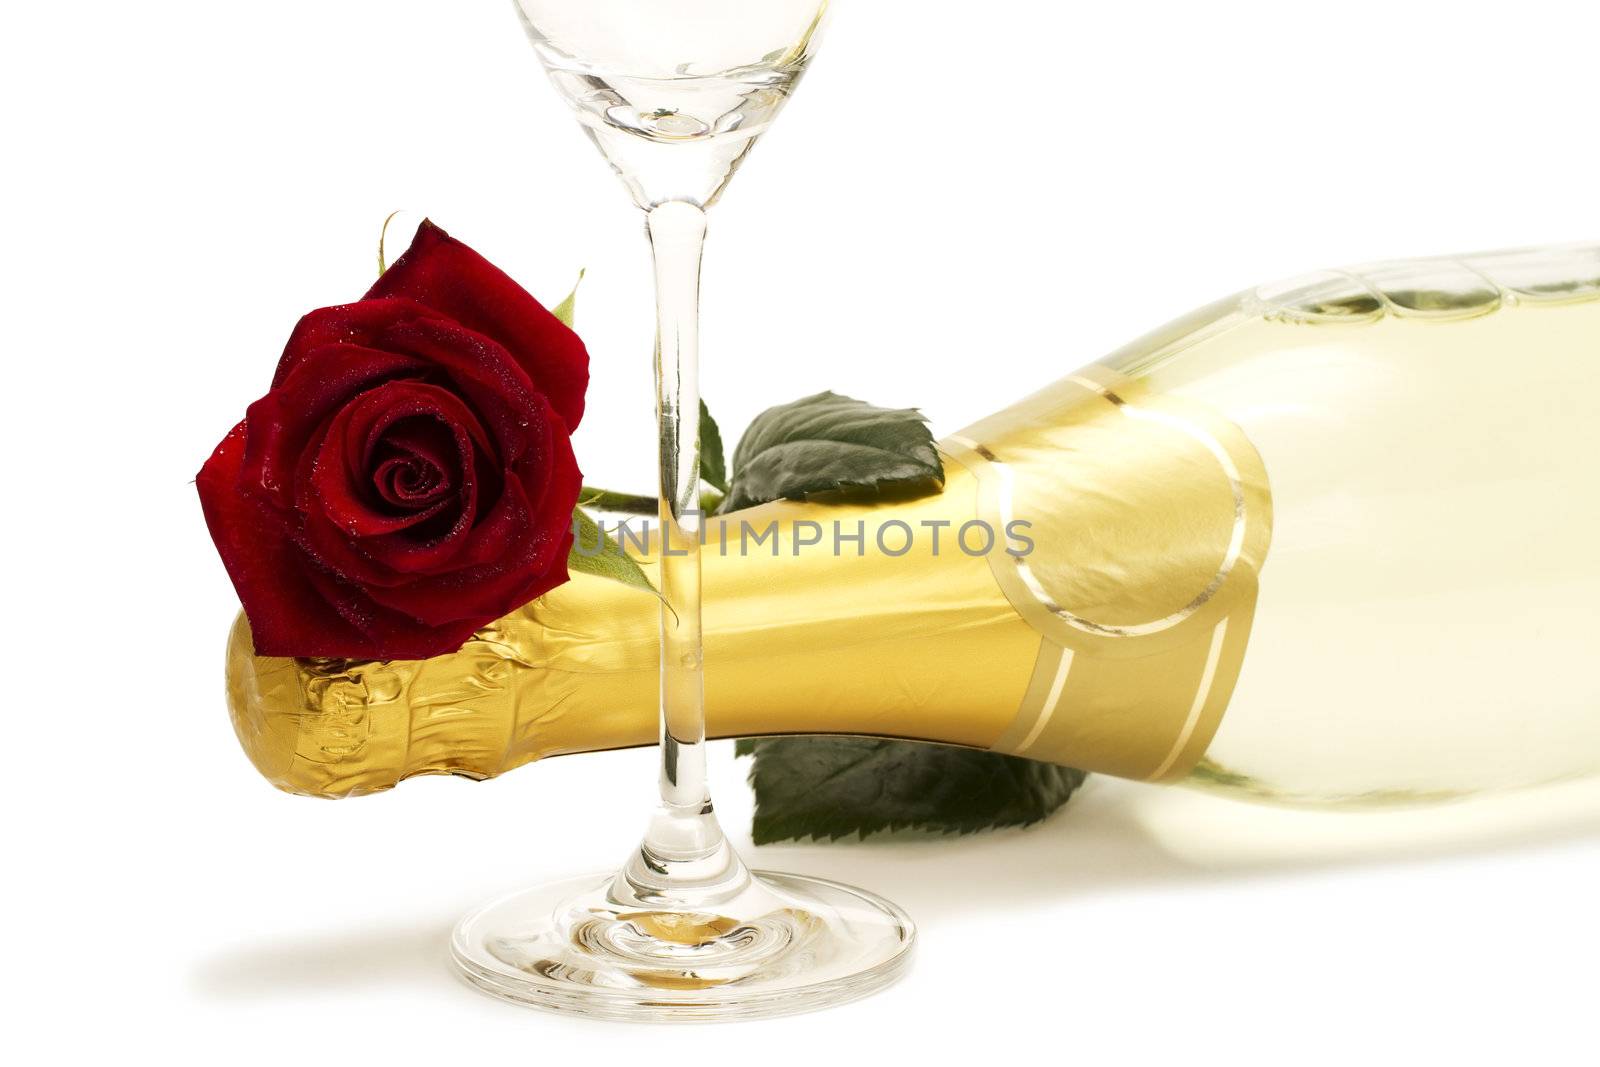 wet red rose on a champagne bottle behind a champagne glass on white background